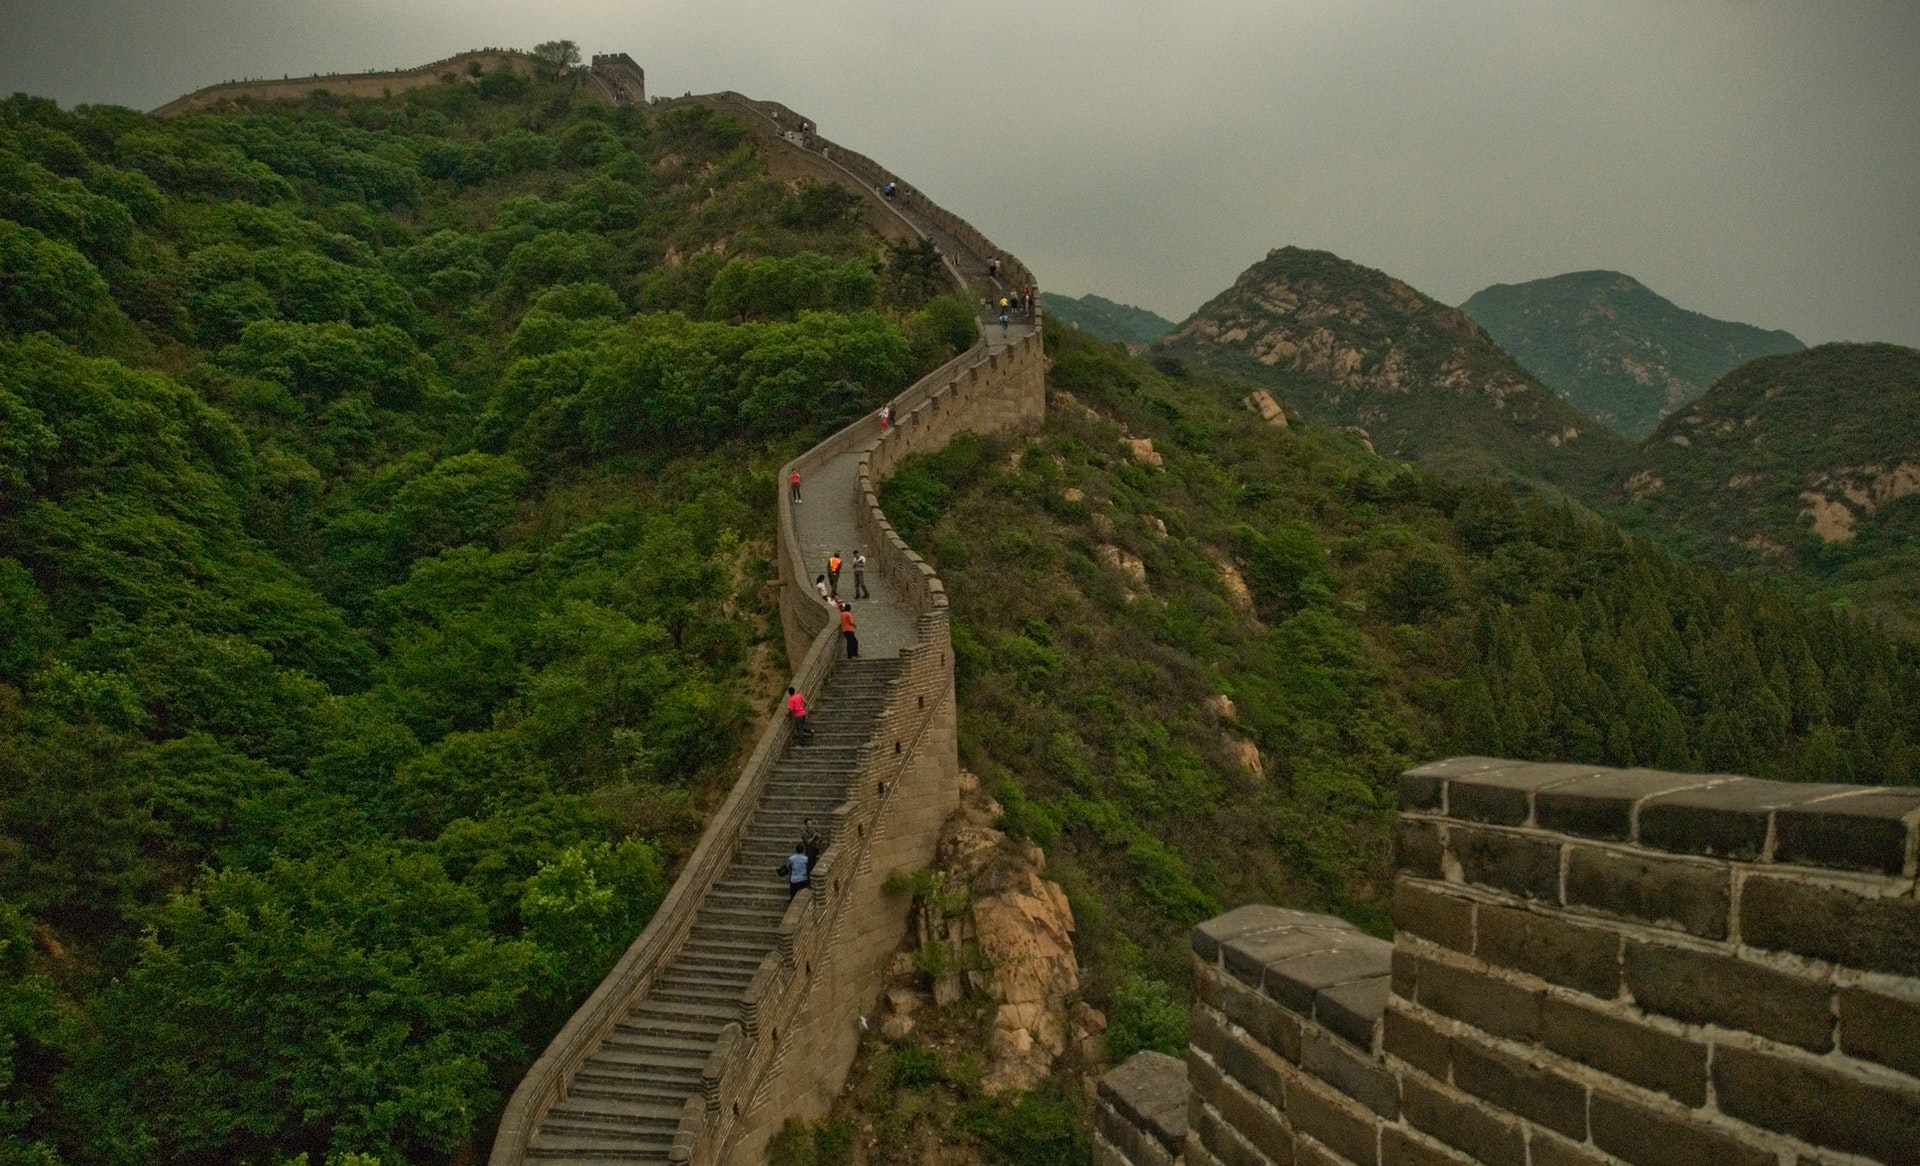 Things to do at the Great Wall of China